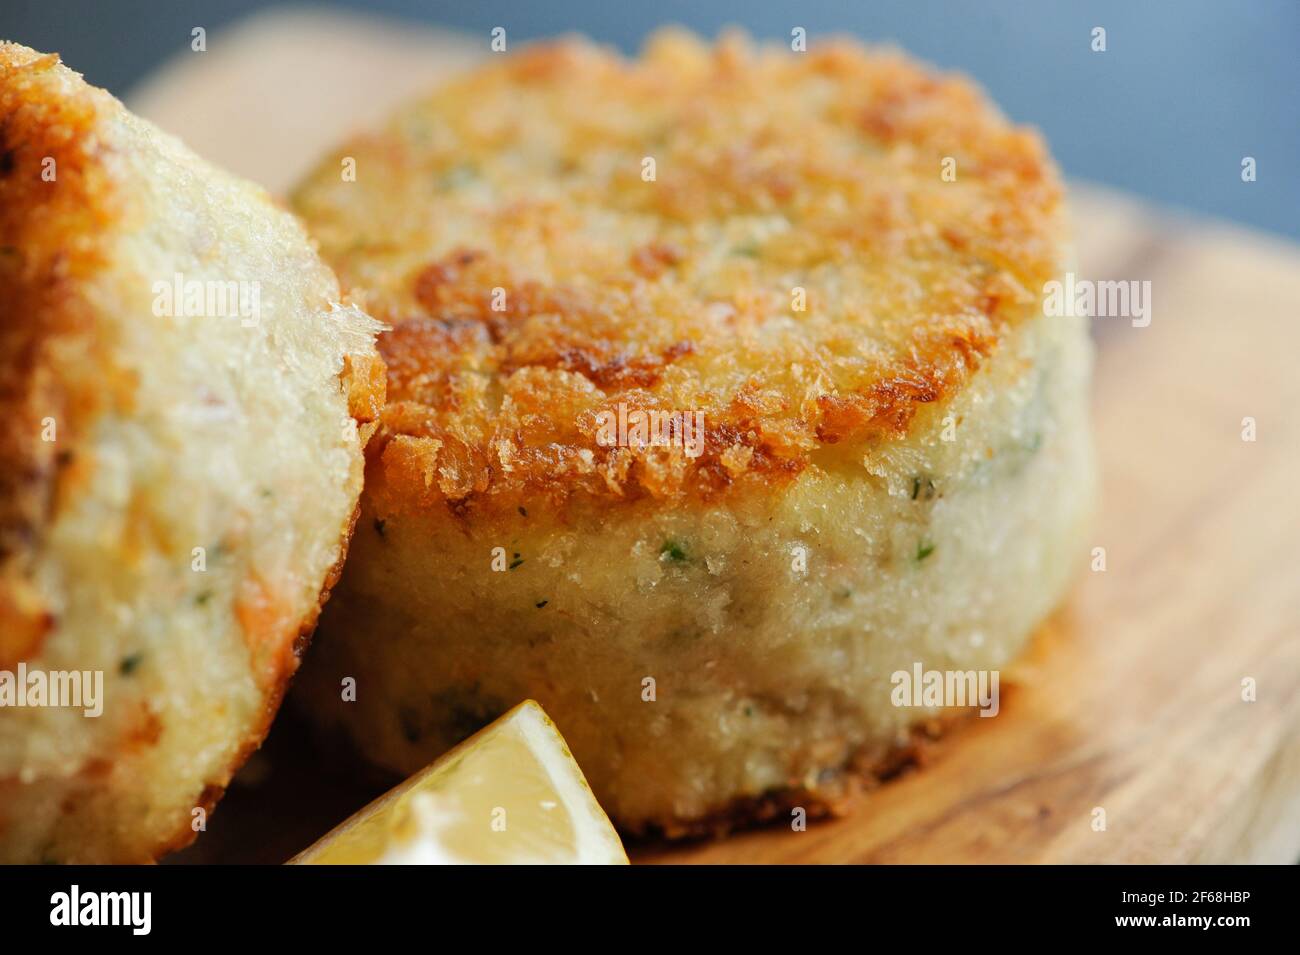 Tasty fishcakes being prepared in a professional kitchen Stock Photo